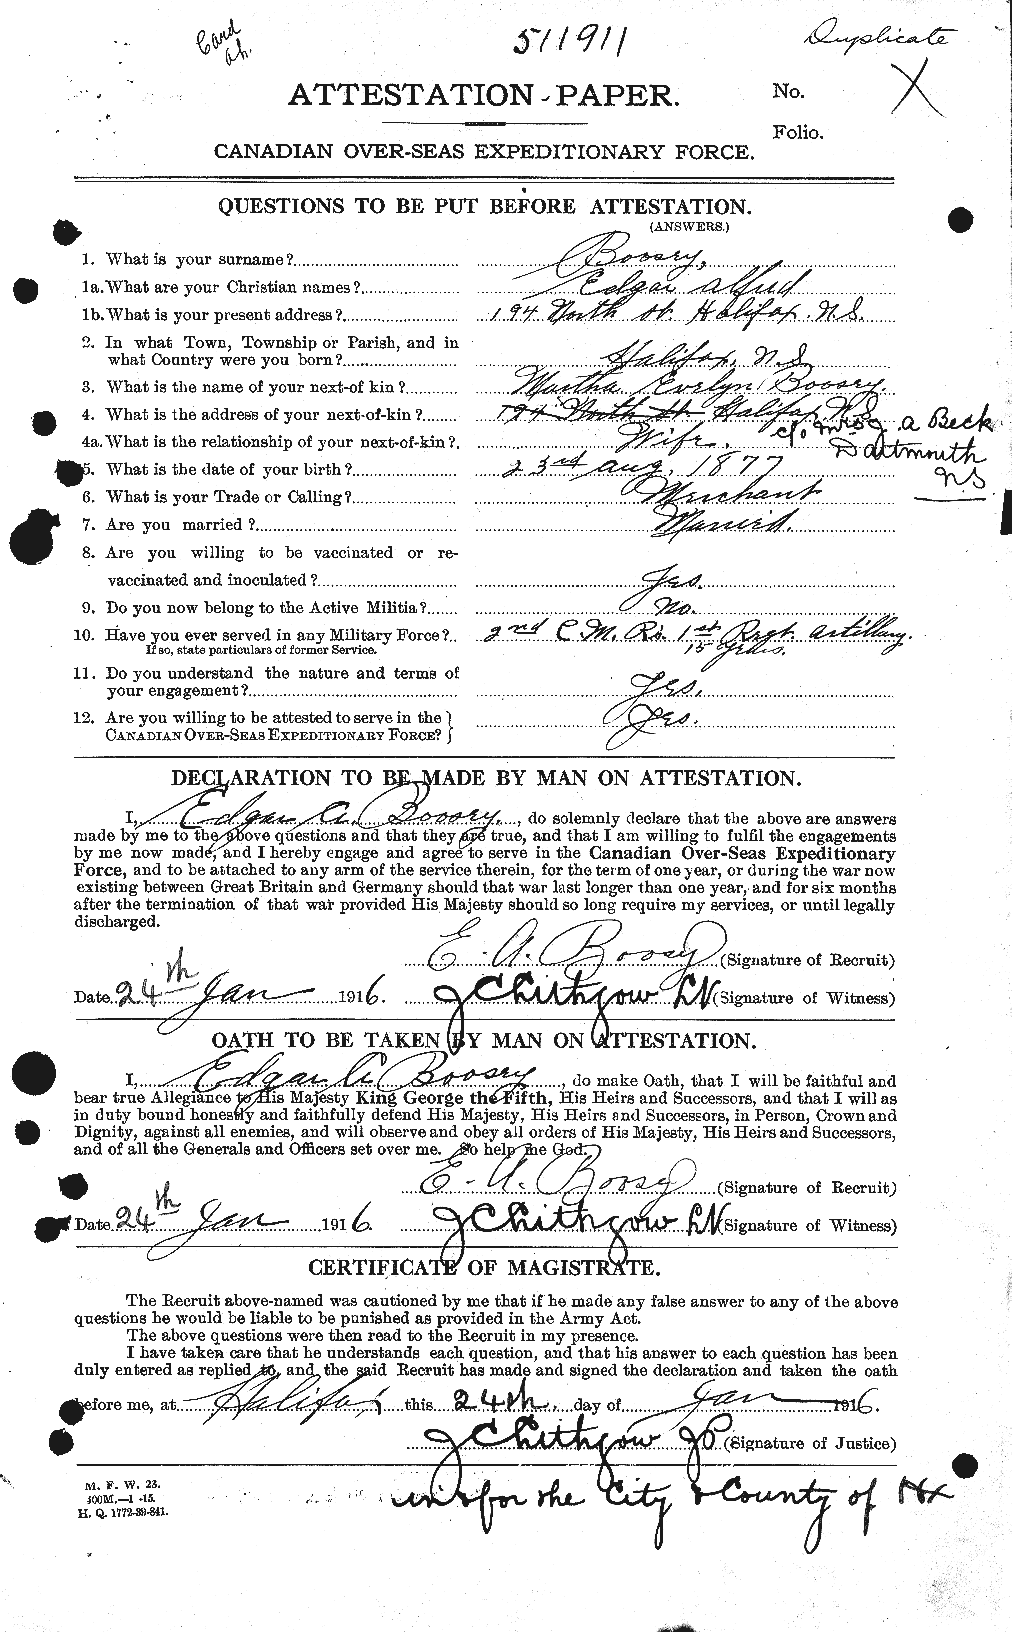 Personnel Records of the First World War - CEF 251390a